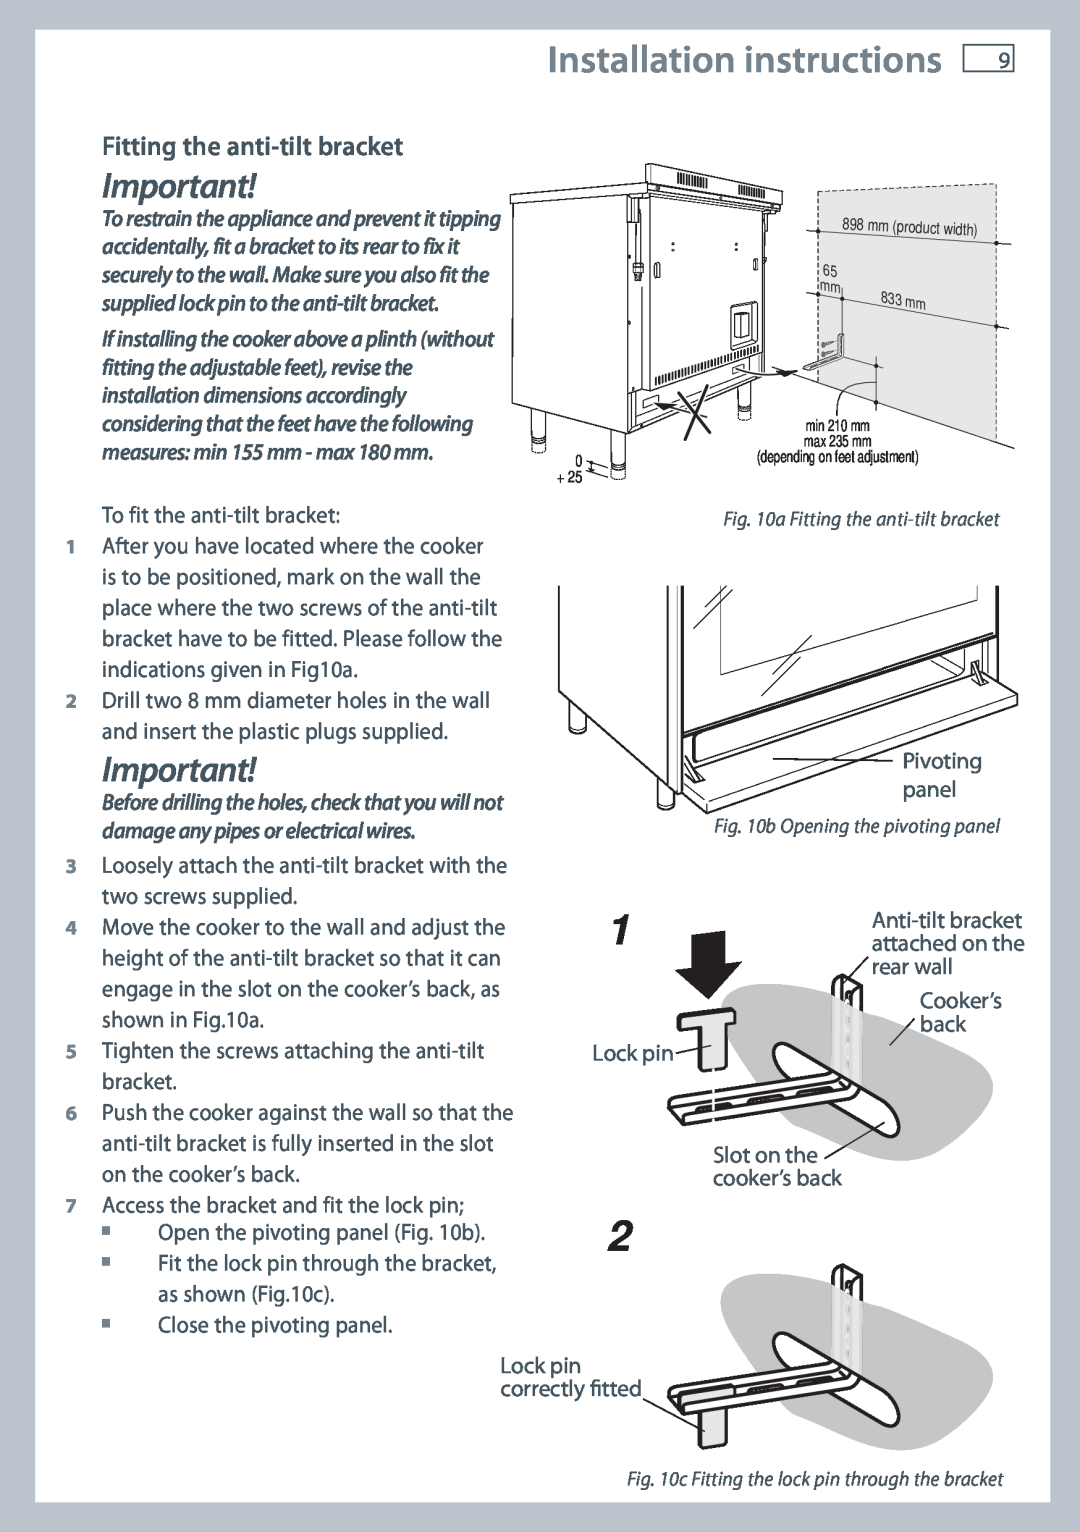 Fisher & Paykel OR90SDBGFX Installation instructions, Fitting the anti-tilt bracket, 0 +, 65 mm, mm product width 833 mm 